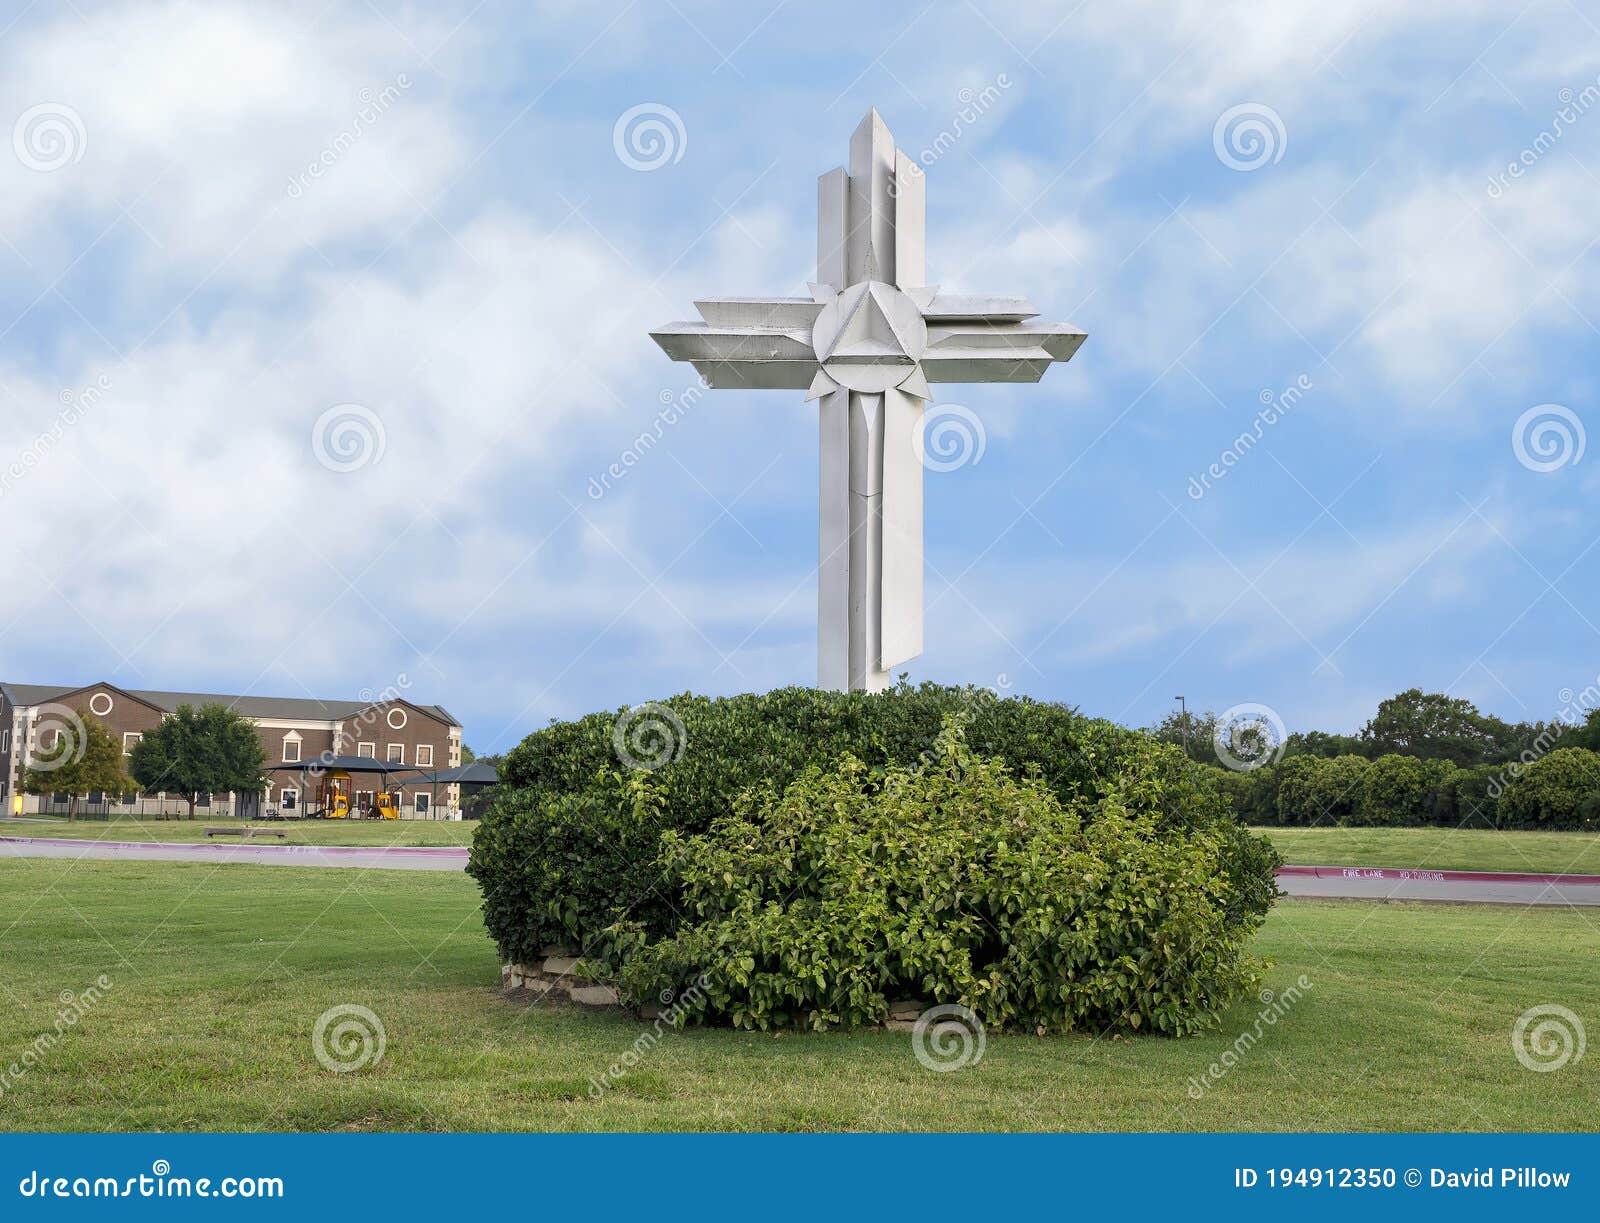 ornate white wooden cross surrounded by green bushes in plano, texas.